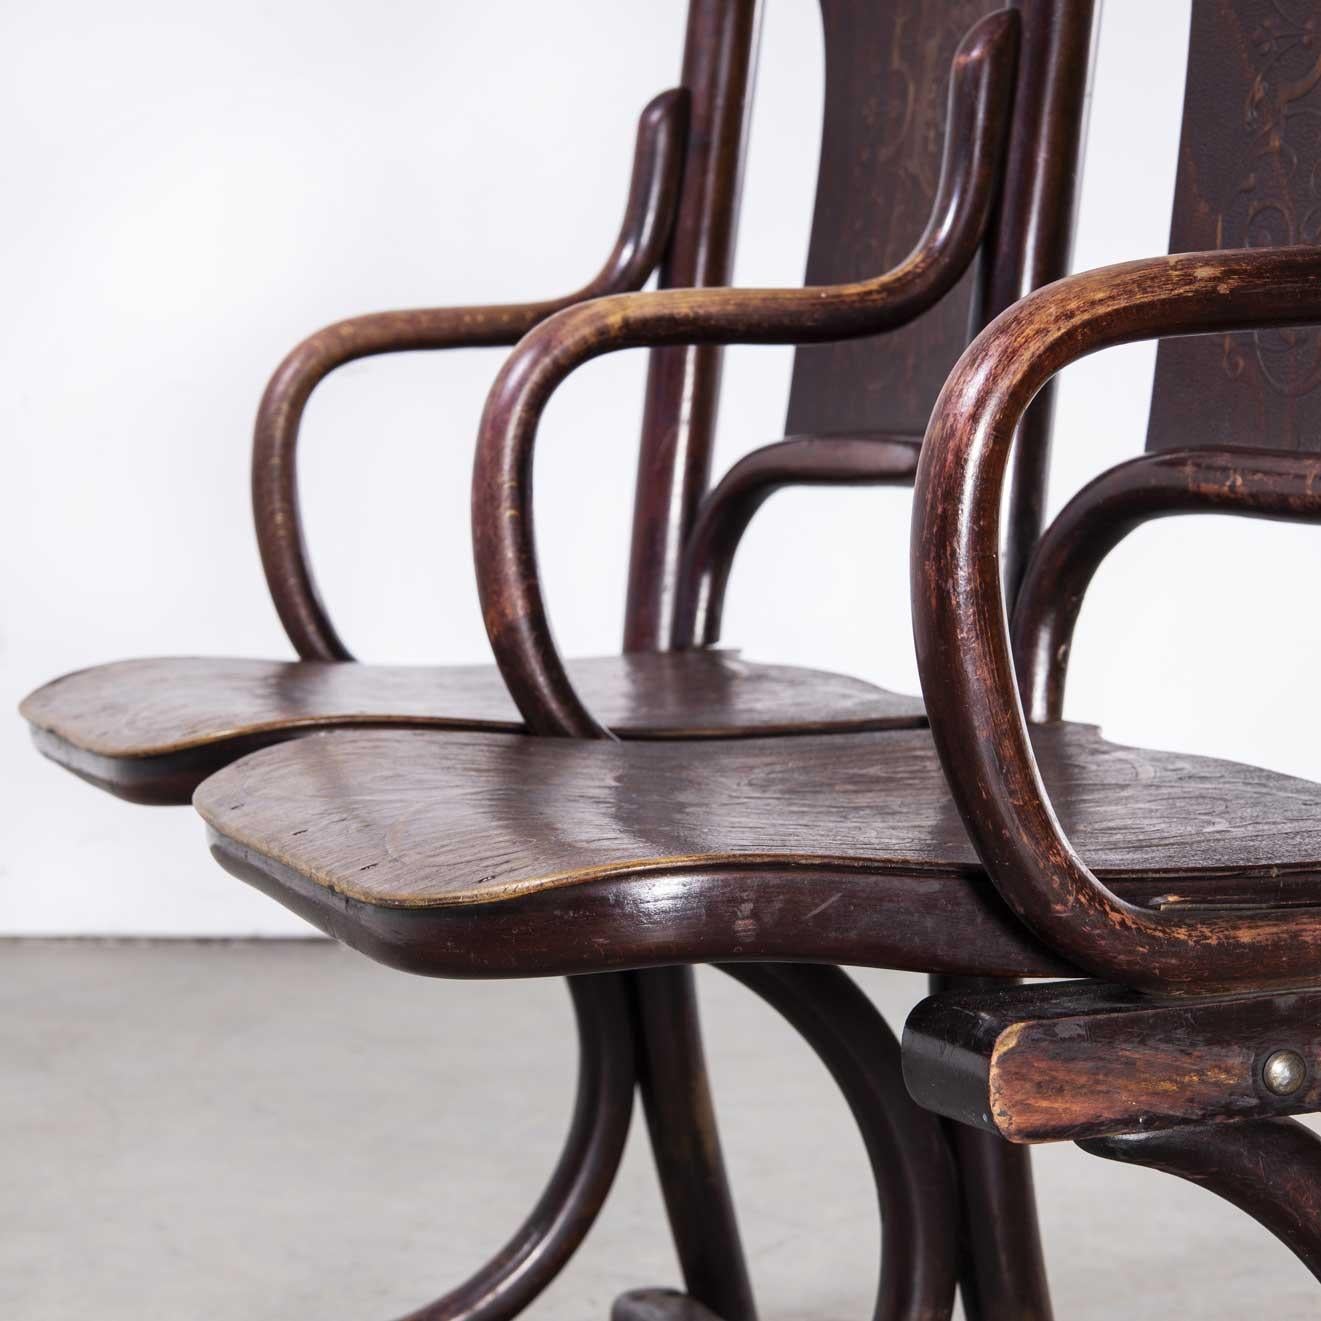 19th Century Thonet original theatre seats (1717.2)
19th Century Thonet original theatre seats. Founded in the early 19th Century by Michael Thonet, Thonet invented the process of steam bending wood under pressure and used this to design the